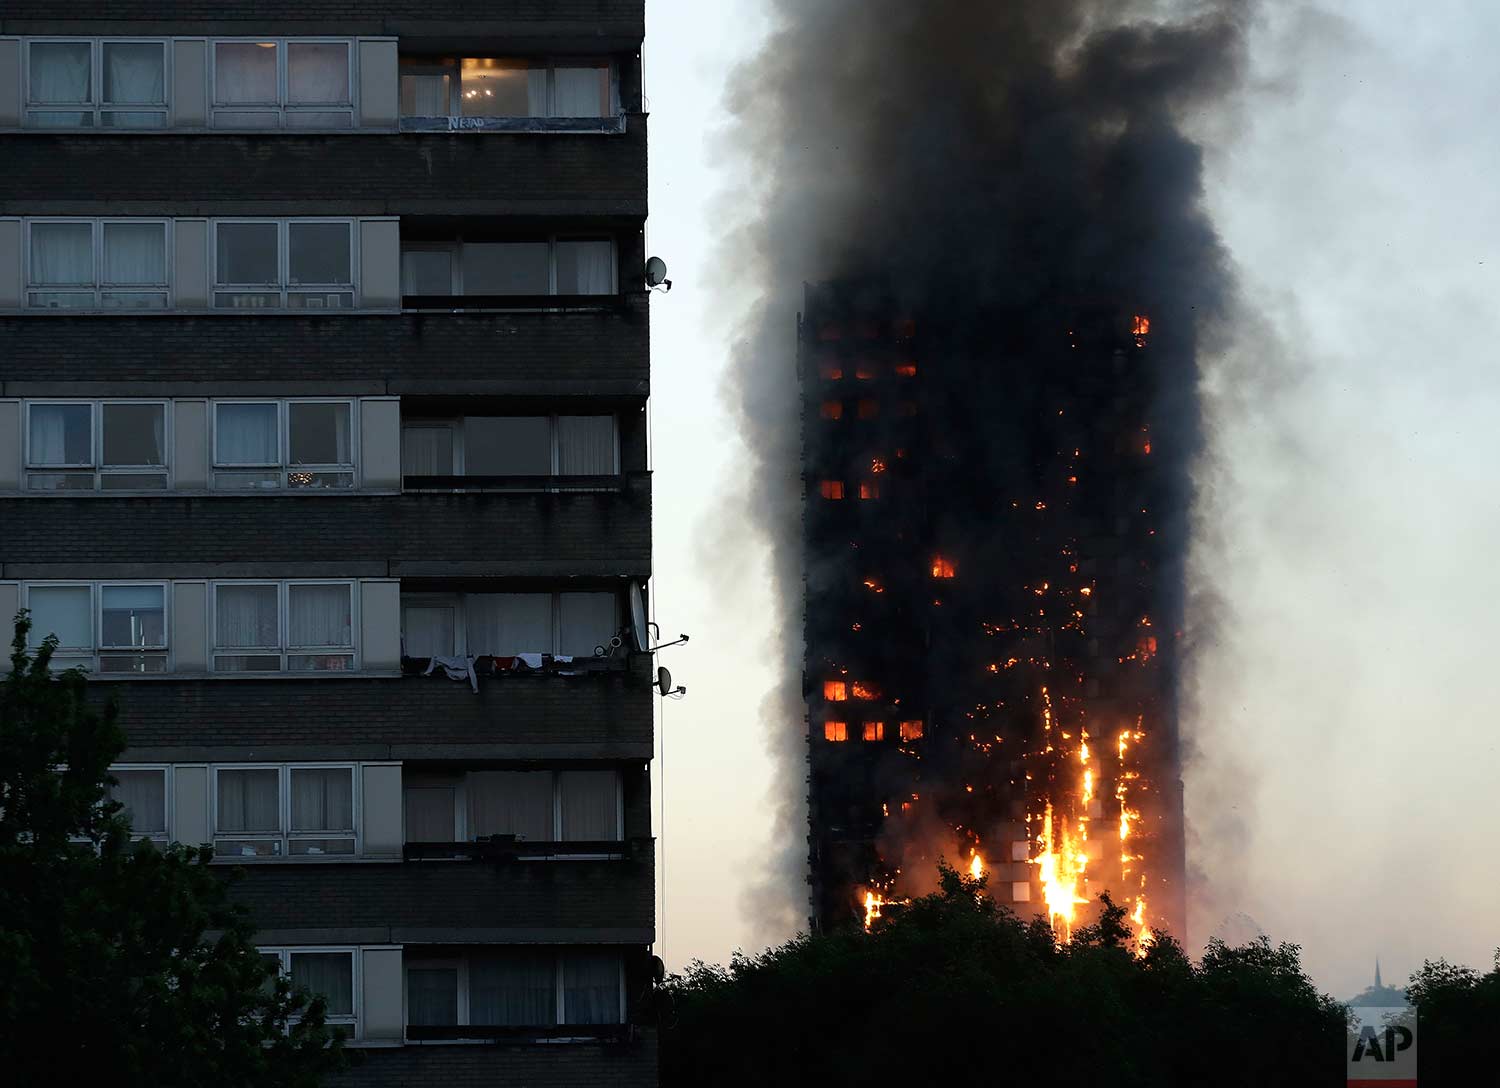  In this Wednesday, June 14, 2017 photo, smoke and flames rise from the Grenfell Tower high-rise building in west London. (AP Photo/Matt Dunham) 